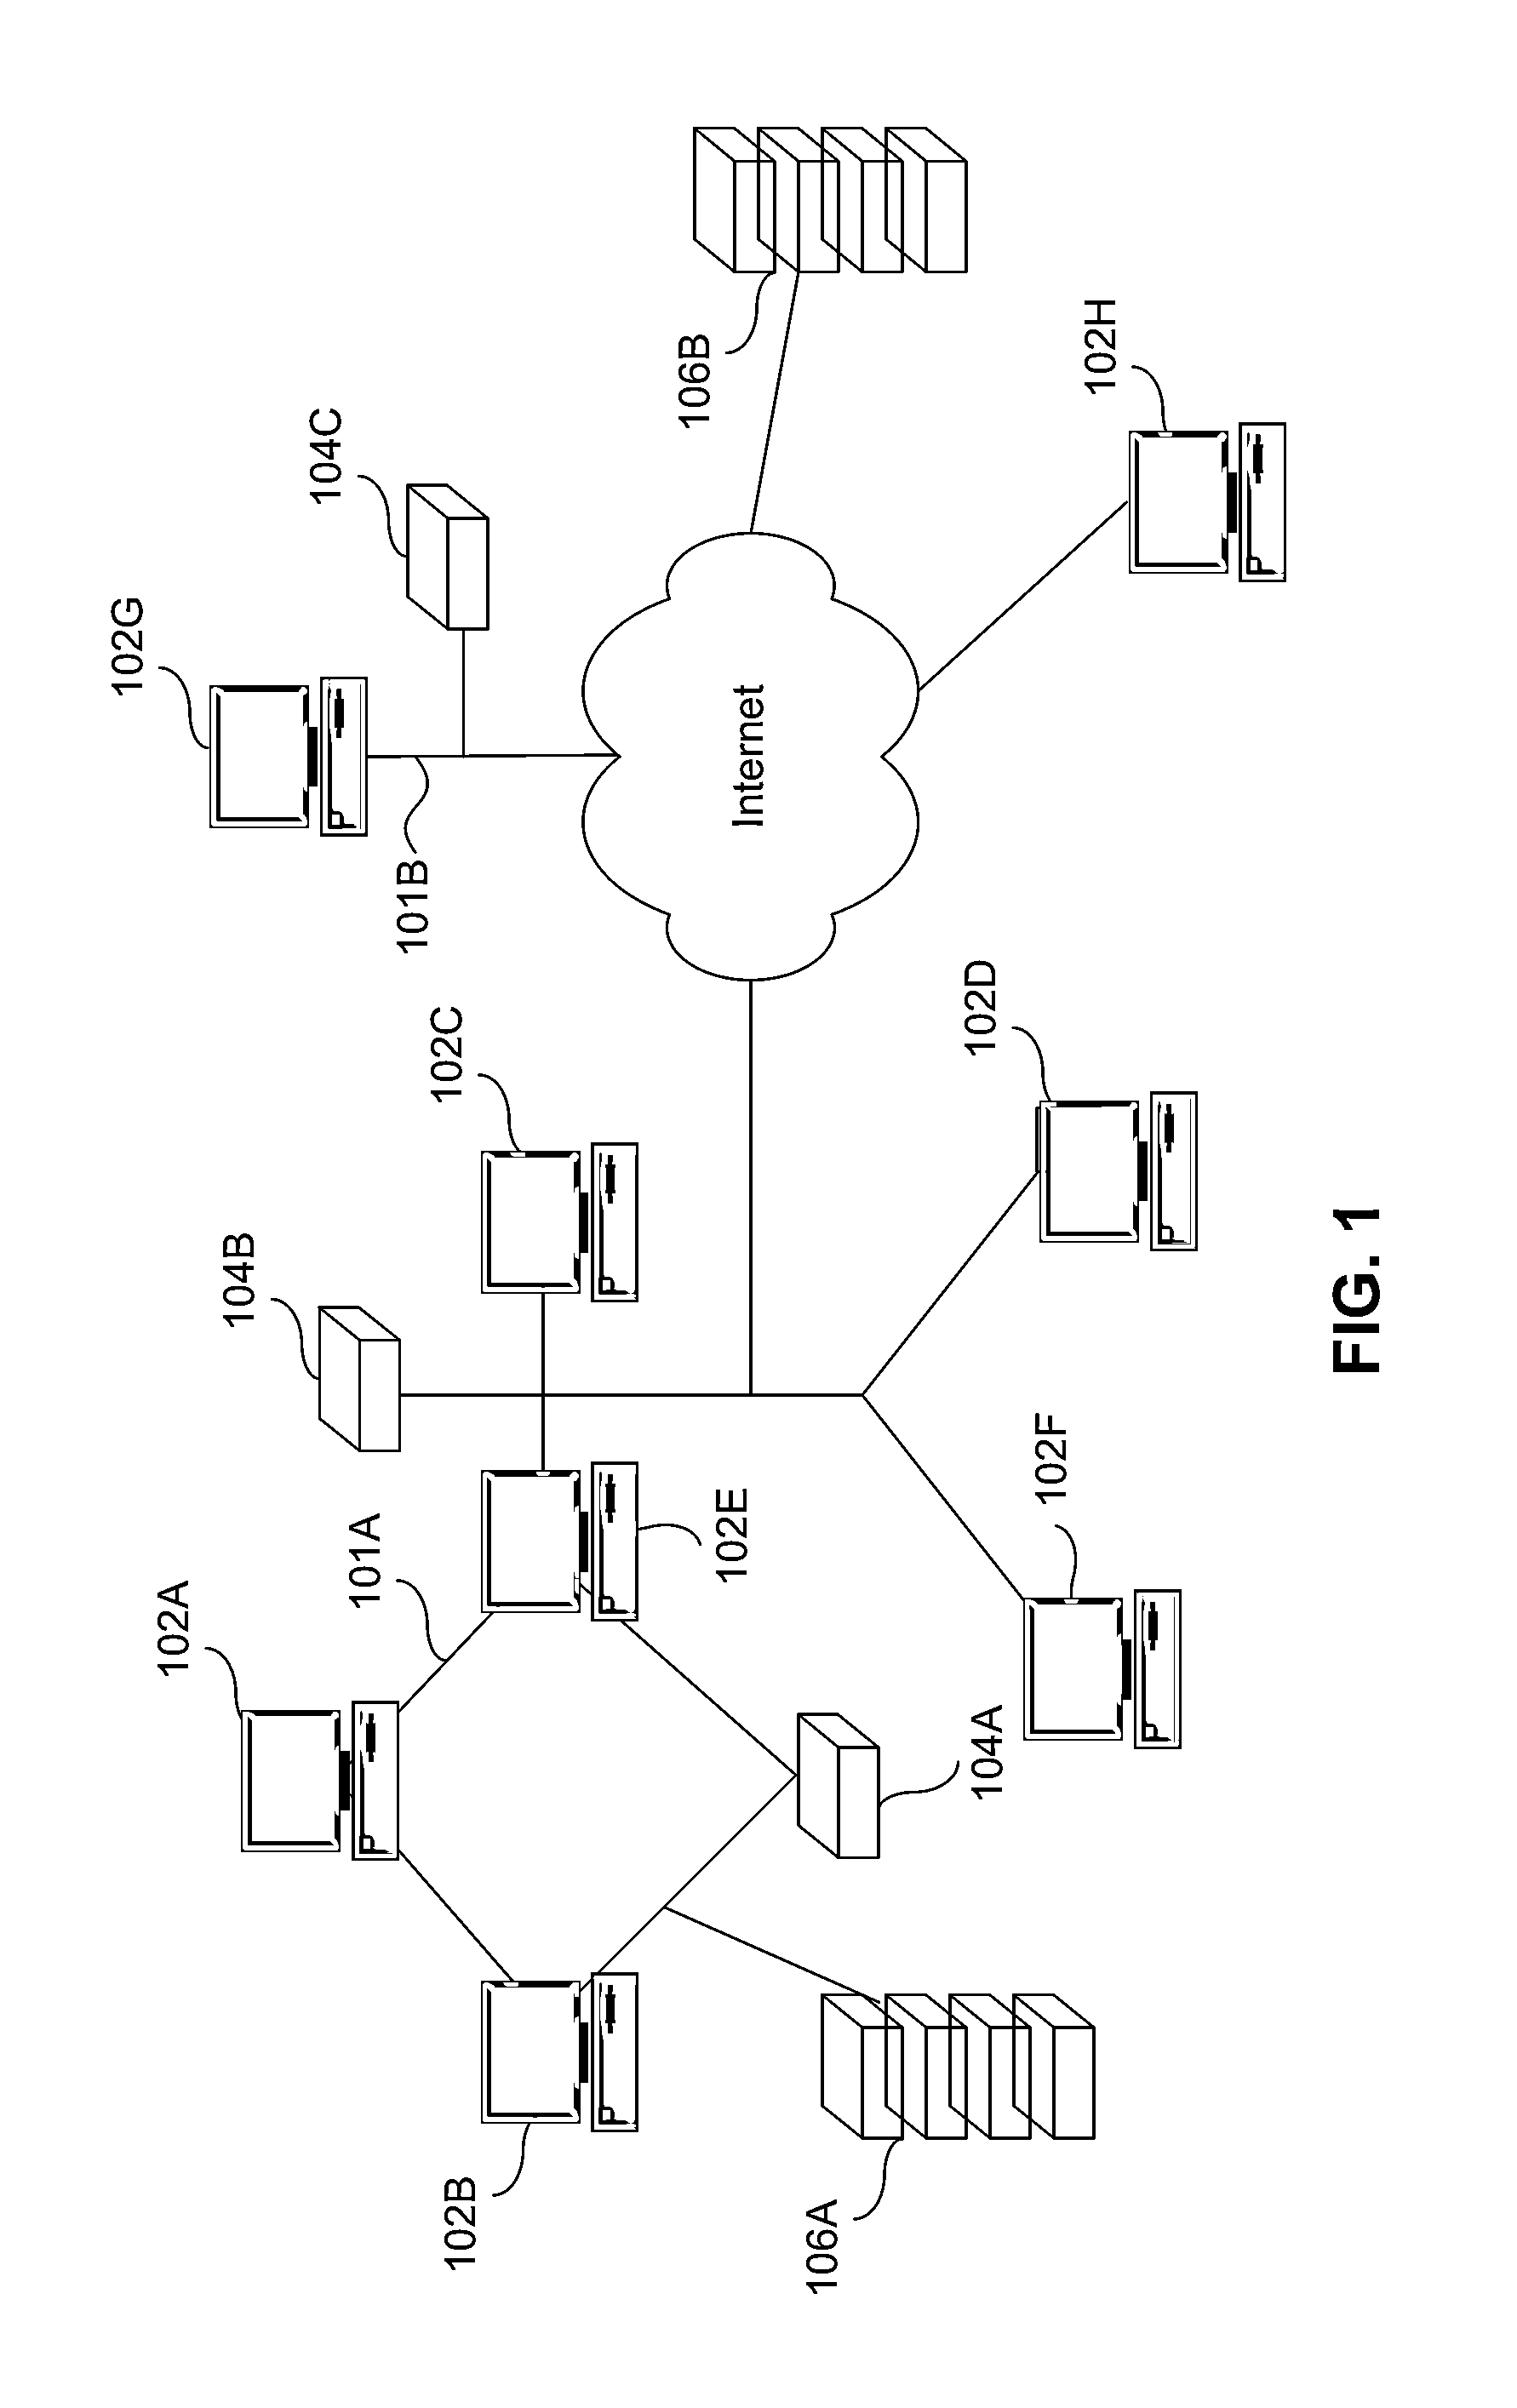 System and method for bare metal restore of a computer over a network